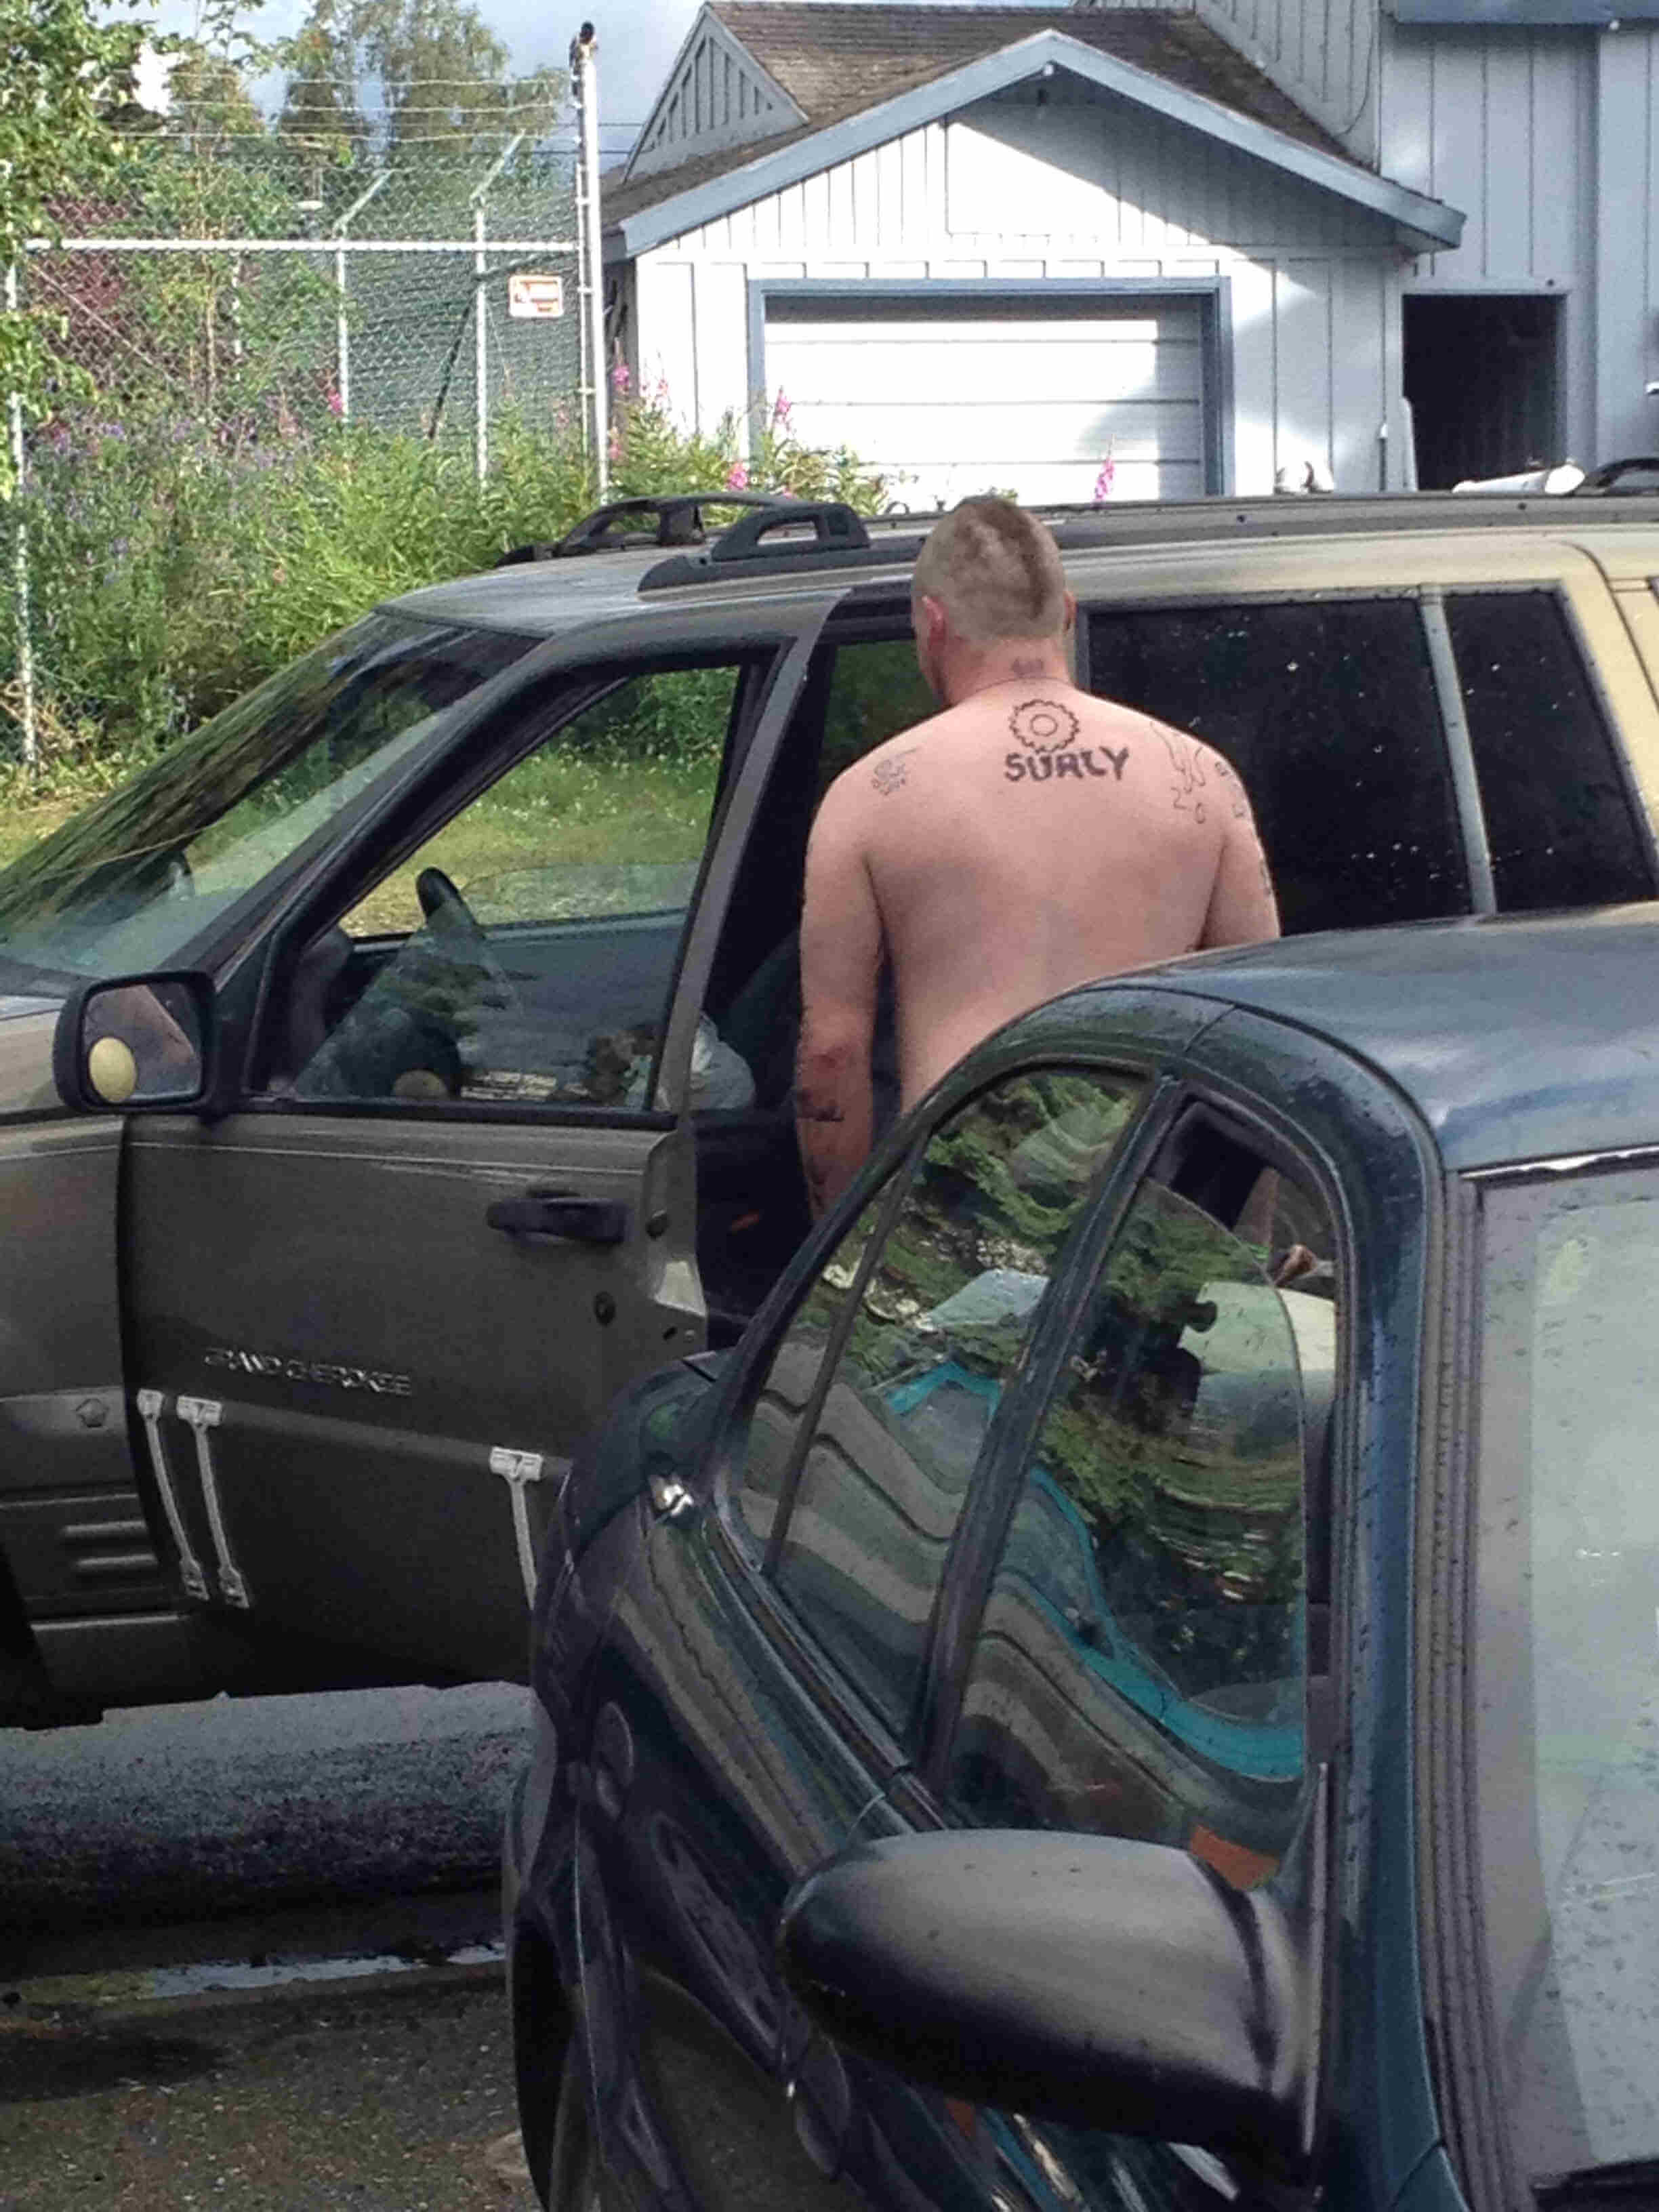 Right view of a person, standing next to an open SUV door,  with a bike gear and, Surly drawn on their back with marker